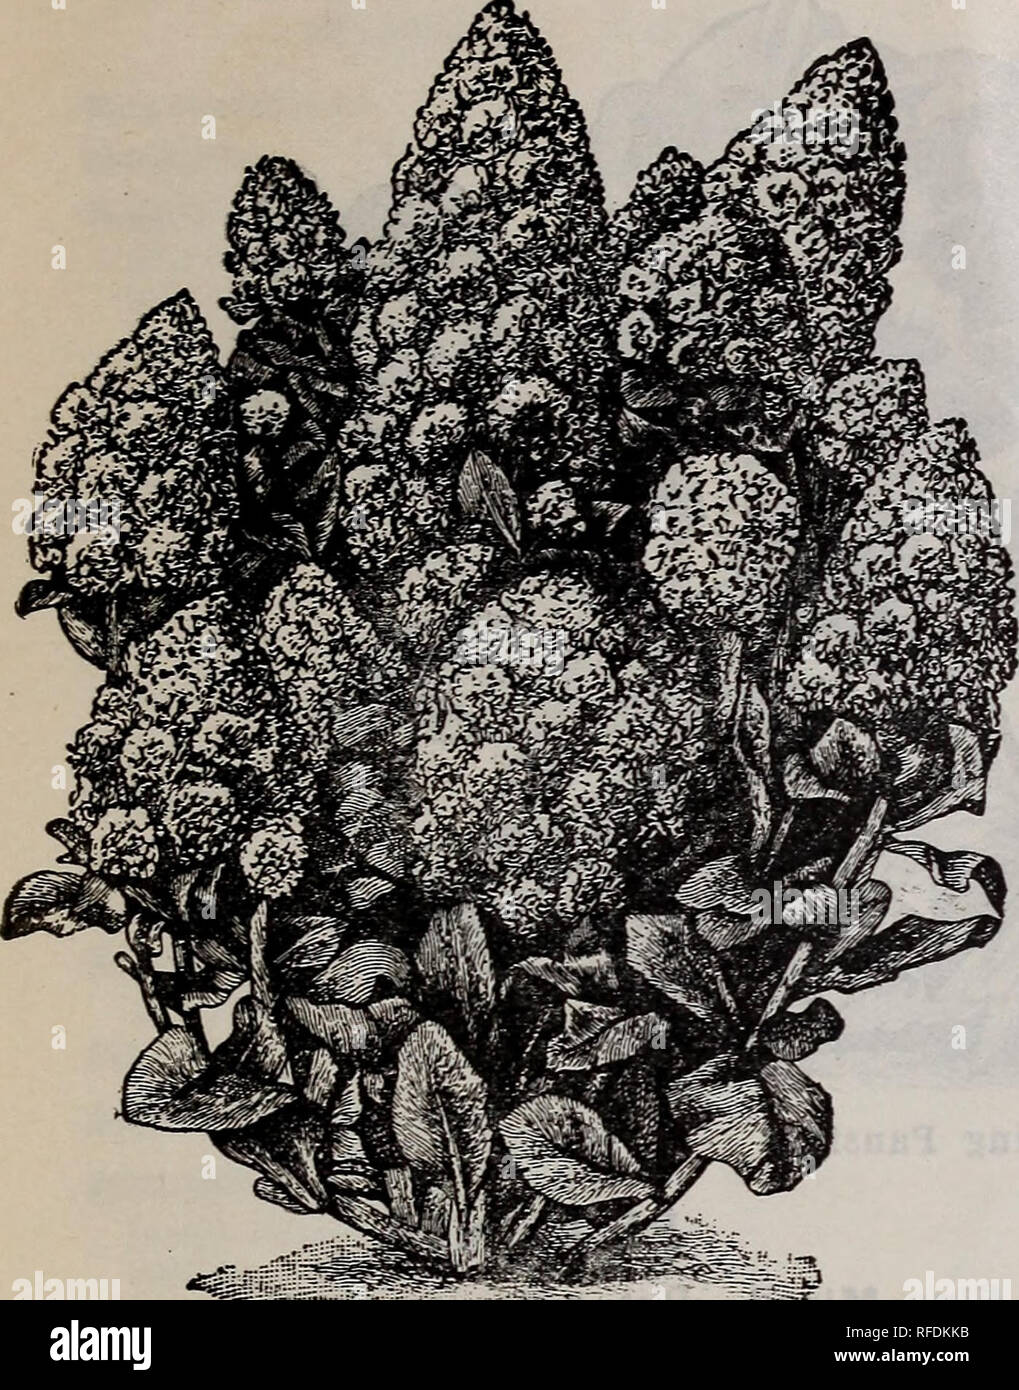 . Catalogue of seeds &amp; plants, spring 1901-1902. Nursery stock, Connecticut, Catalogs; Vegetables, Seeds, Catalogs; Herbs, Seeds, Catalogs; Flowers, Catalogs. GENERAL LIST OF FLOWER SEEDS 21. Migrnonette. MARIGOLD Double African, Mixed Colors. Pkt.5cts., oz. 30 cts. Double Dwarf French. Deep maroon. Pkt. 5 cts., oz. 30 cts. Compact Cold-Striped. Grows about a foot high, forming a compact bush. Pkt. 10 cts. Pot. See Calendula. Pkt. 5 cts. MARVEL OF PERU (Four O'Clocks). Fine Mixed Colors. Pkt. 5 cts. MAURANDYA BARCLAYANA. Mixed. Rapid-growing climbing vine. Pkt. 10 cts. MIGNONEITTE Large-Fl Stock Photo